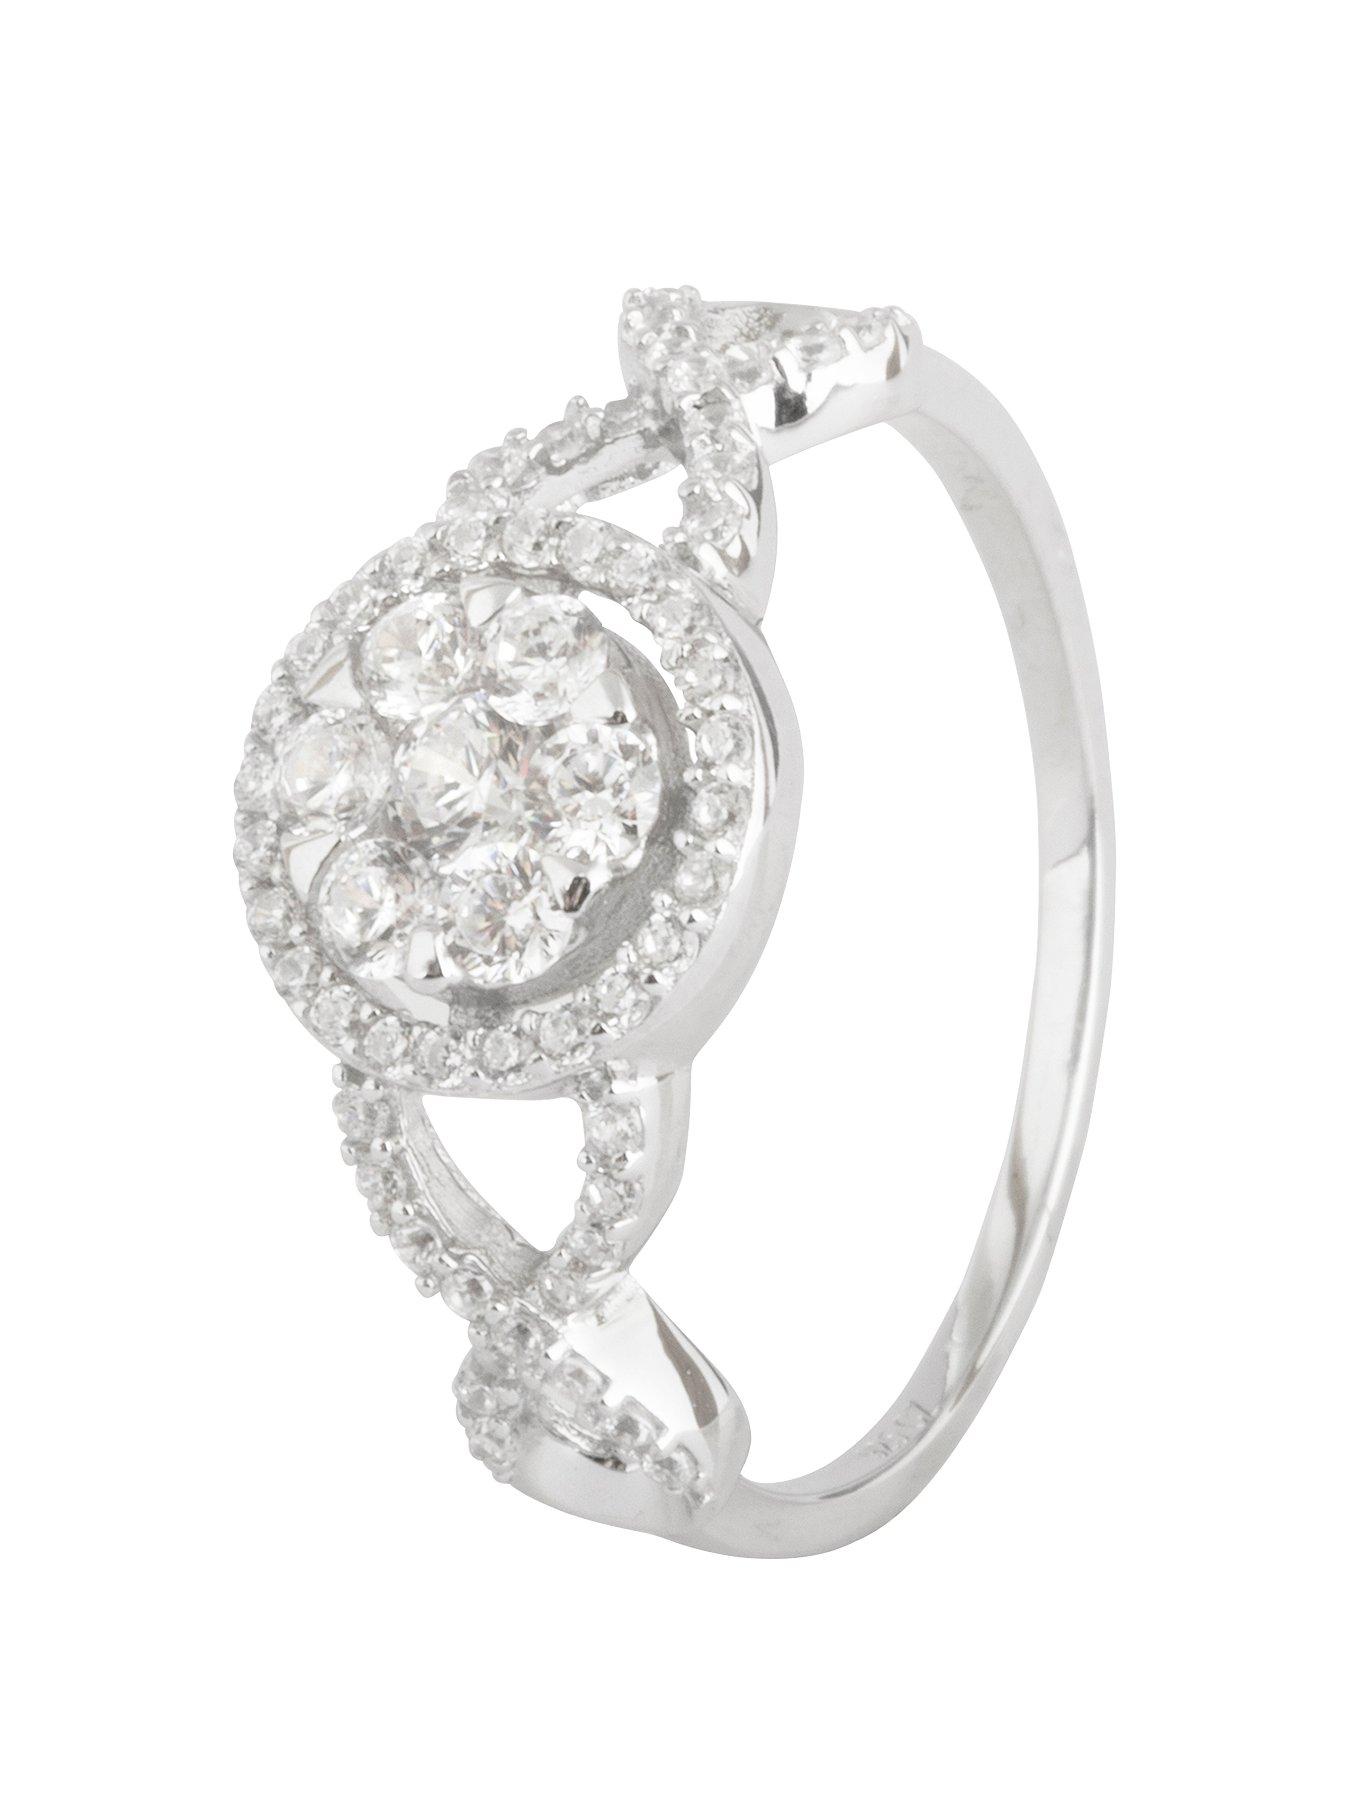 Details about   Sterling Silver Ring with 1.35ct Cubic Zirconia Size 6